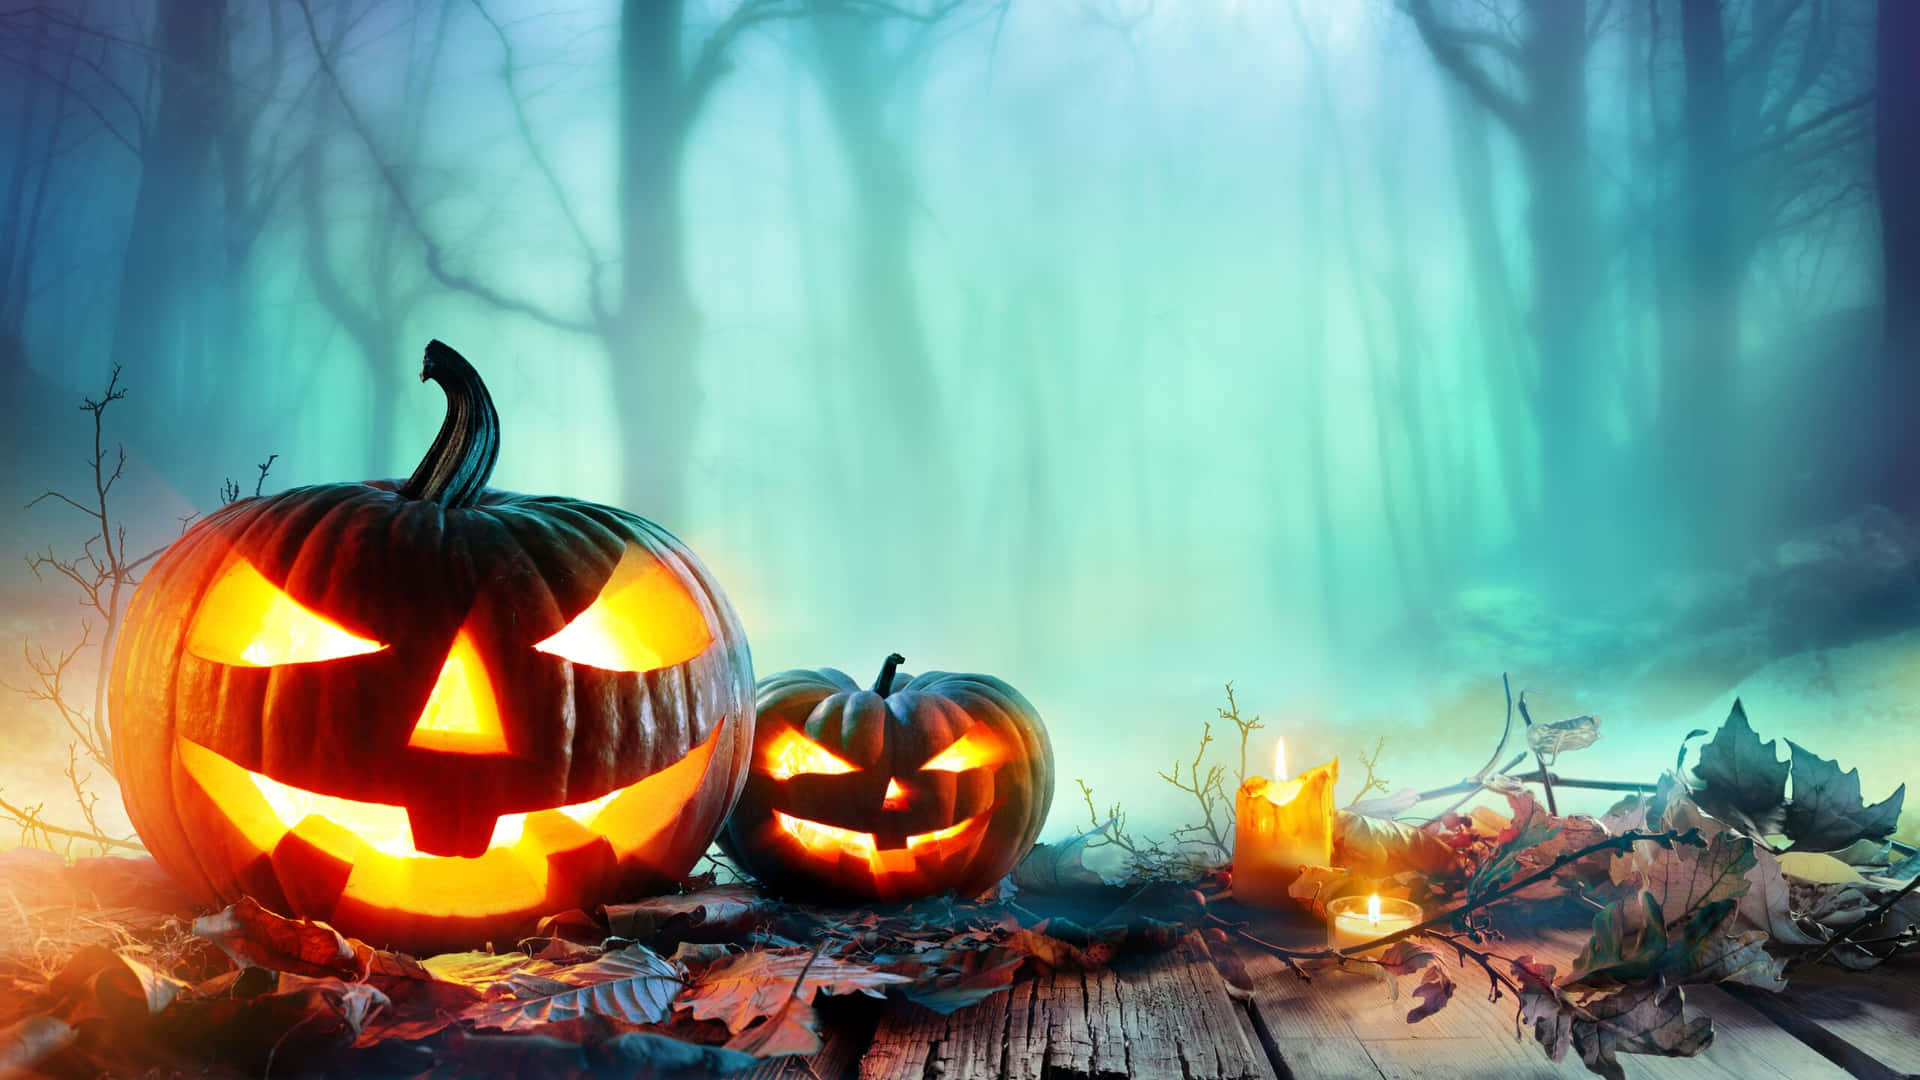 Dress up and get creative this Halloween with orange! Wallpaper